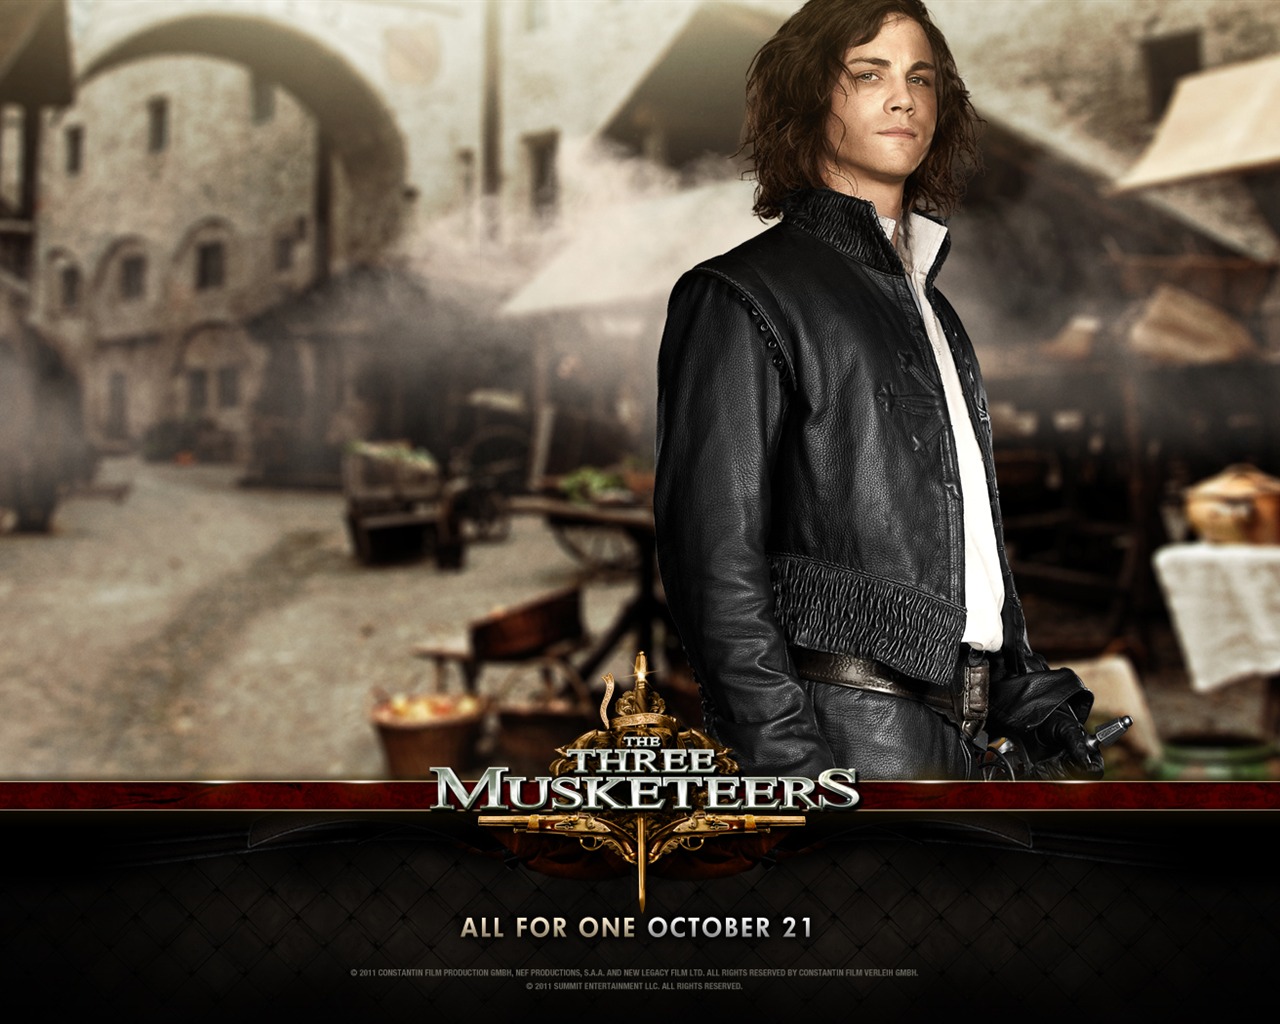 2011 The Three Musketeers wallpapers #6 - 1280x1024